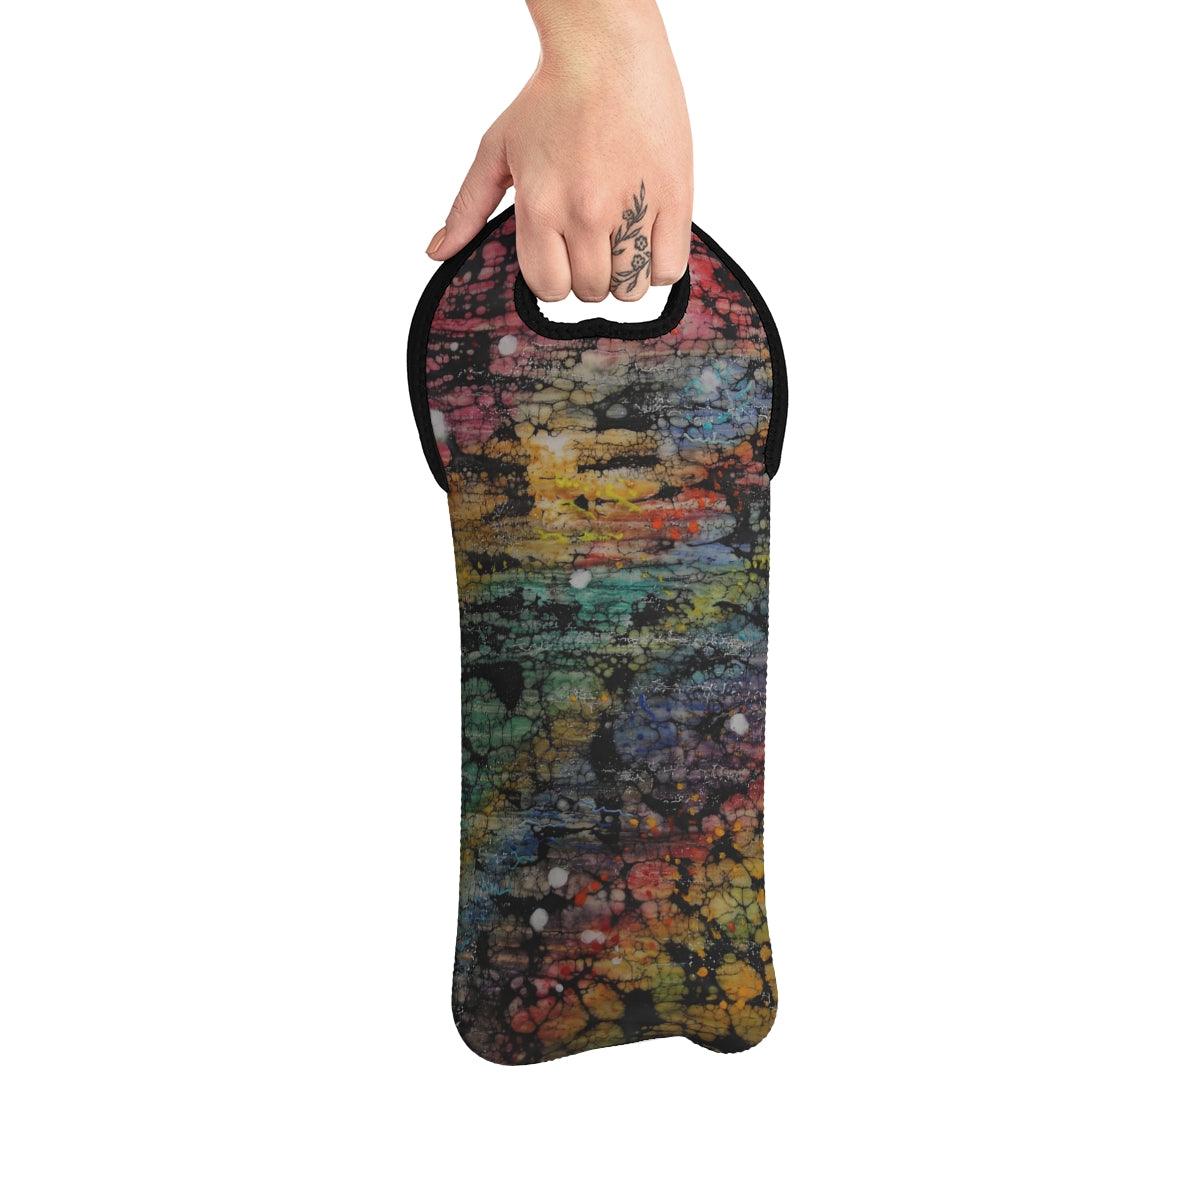 "Synapse 2" Wine Tote Bag-Accessories - Mike Giannella - Encaustic Painting - Mixed Media Artist - Art Prints